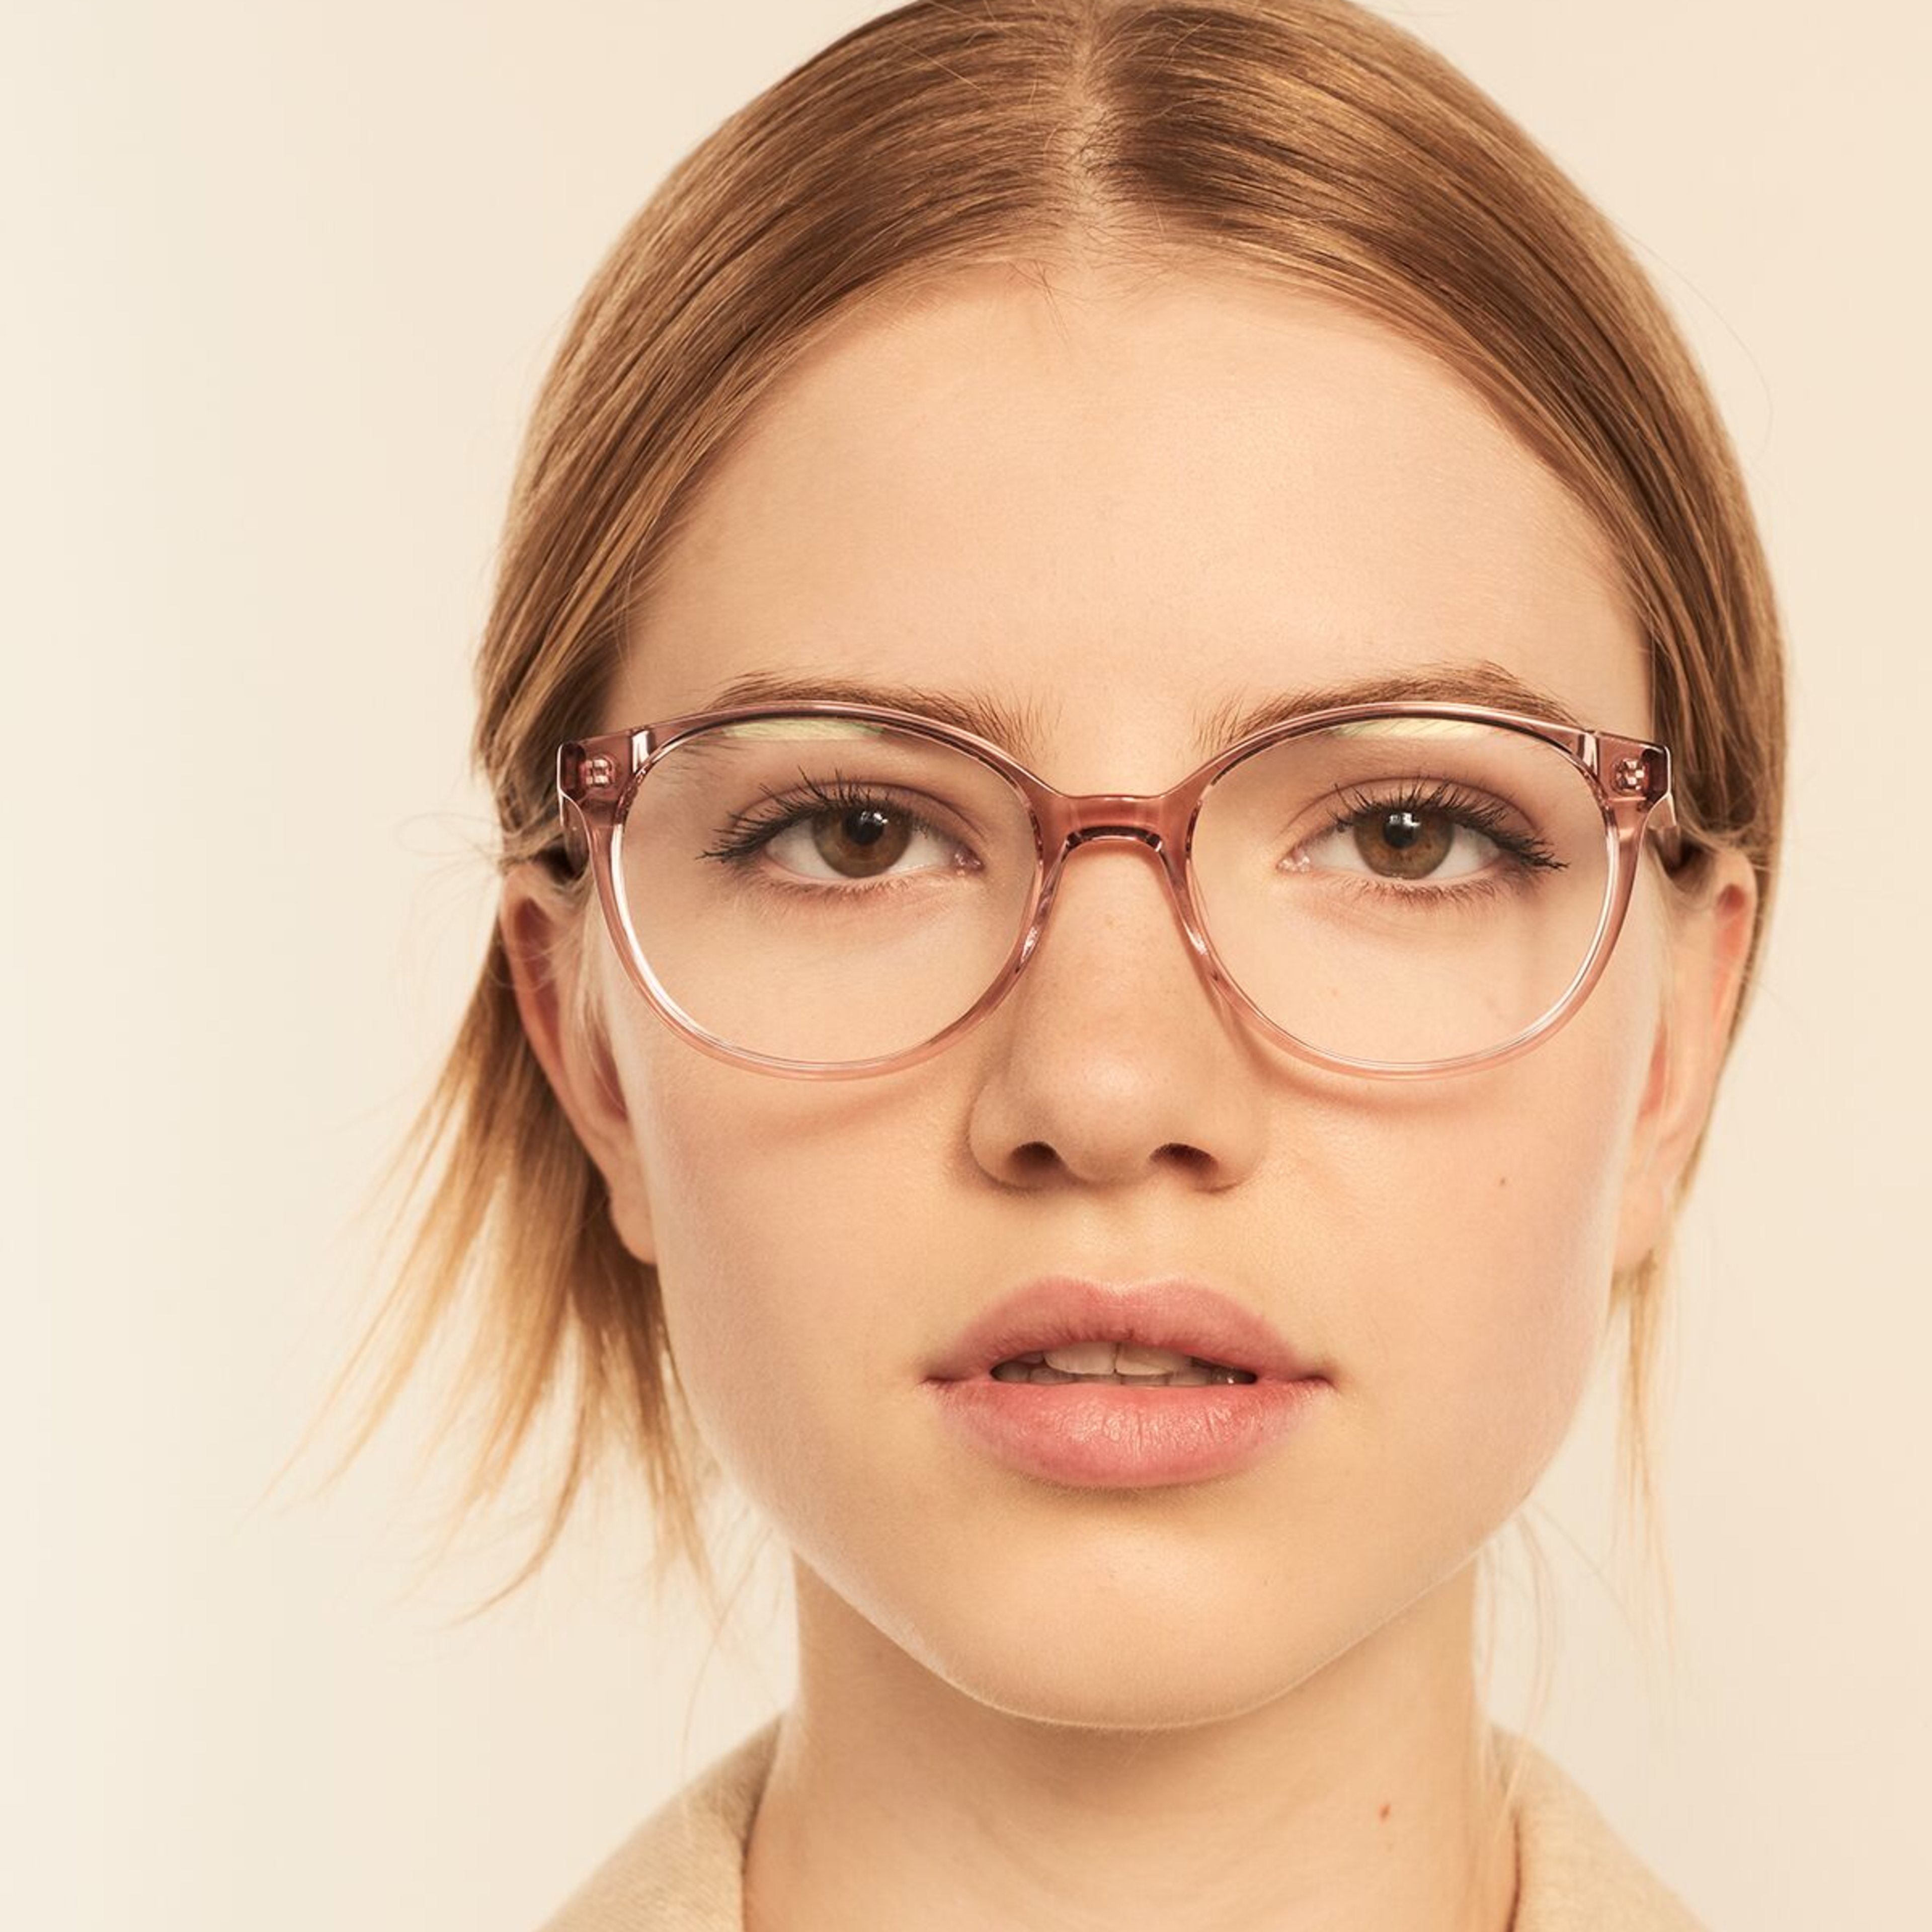 Ace & Tate Optiques | oval Acétate in Rose